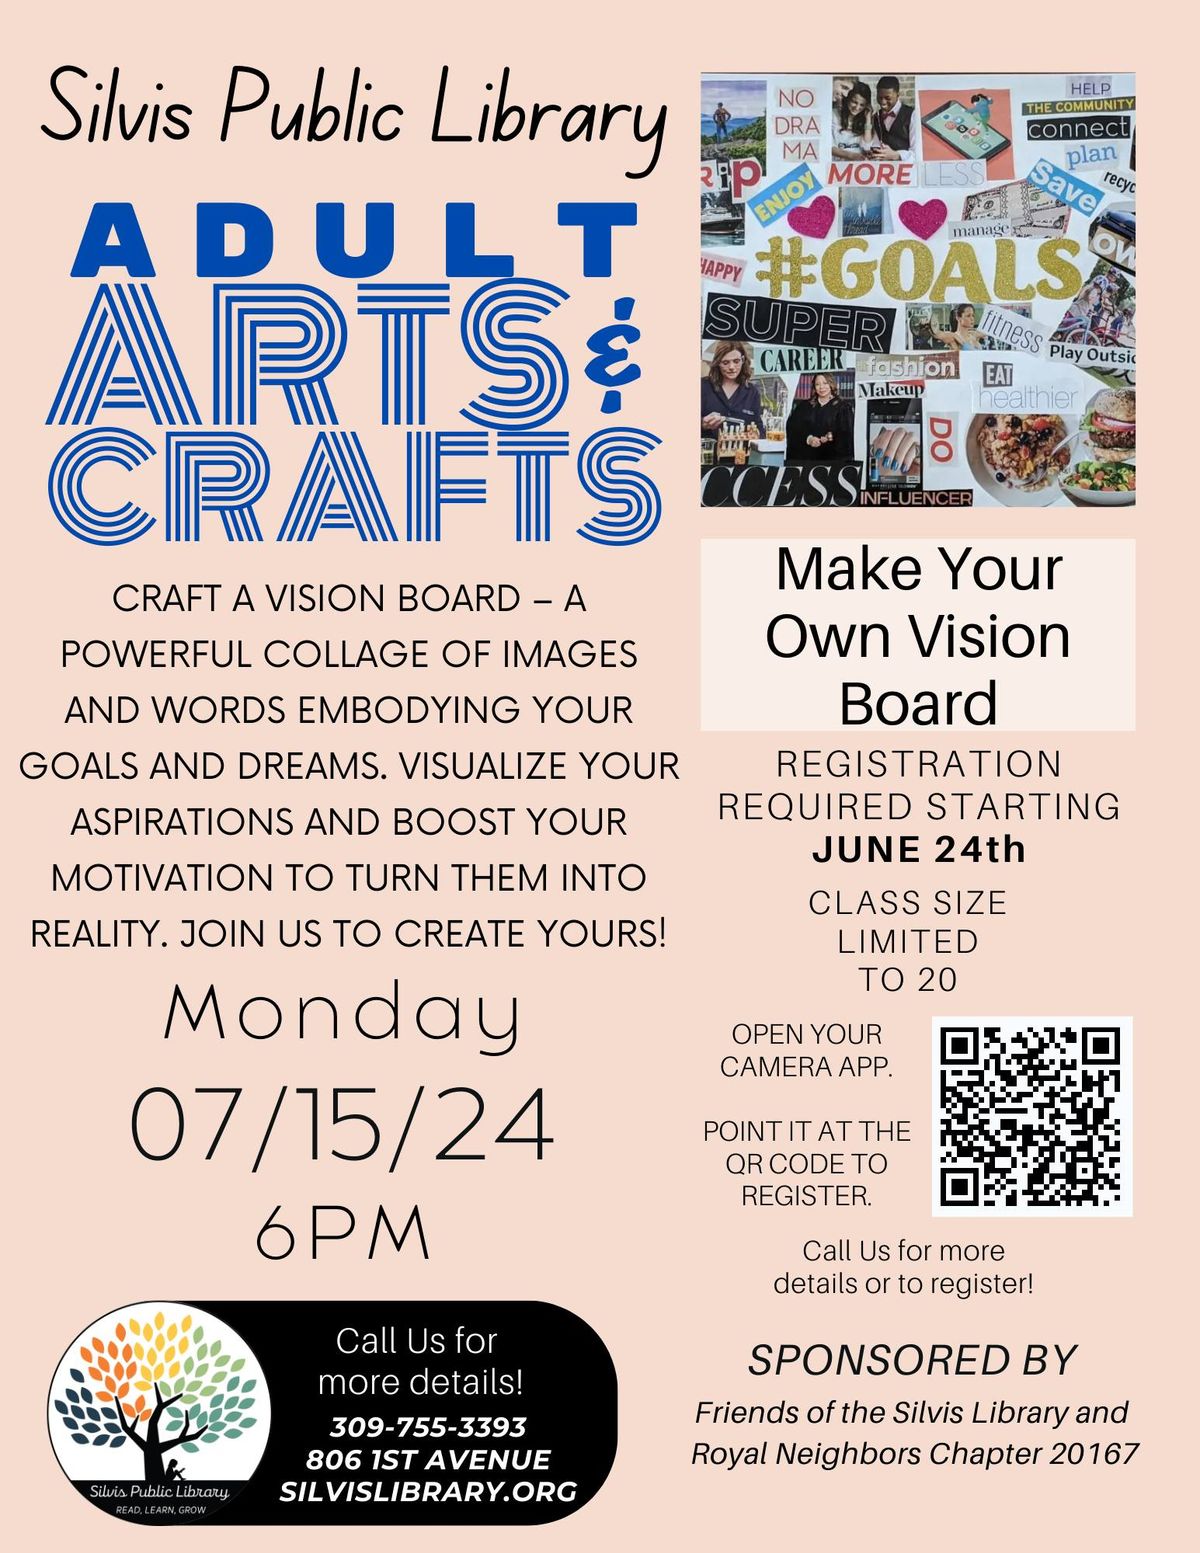 Adult Arts & Crafts: Make Your Own Vision Board